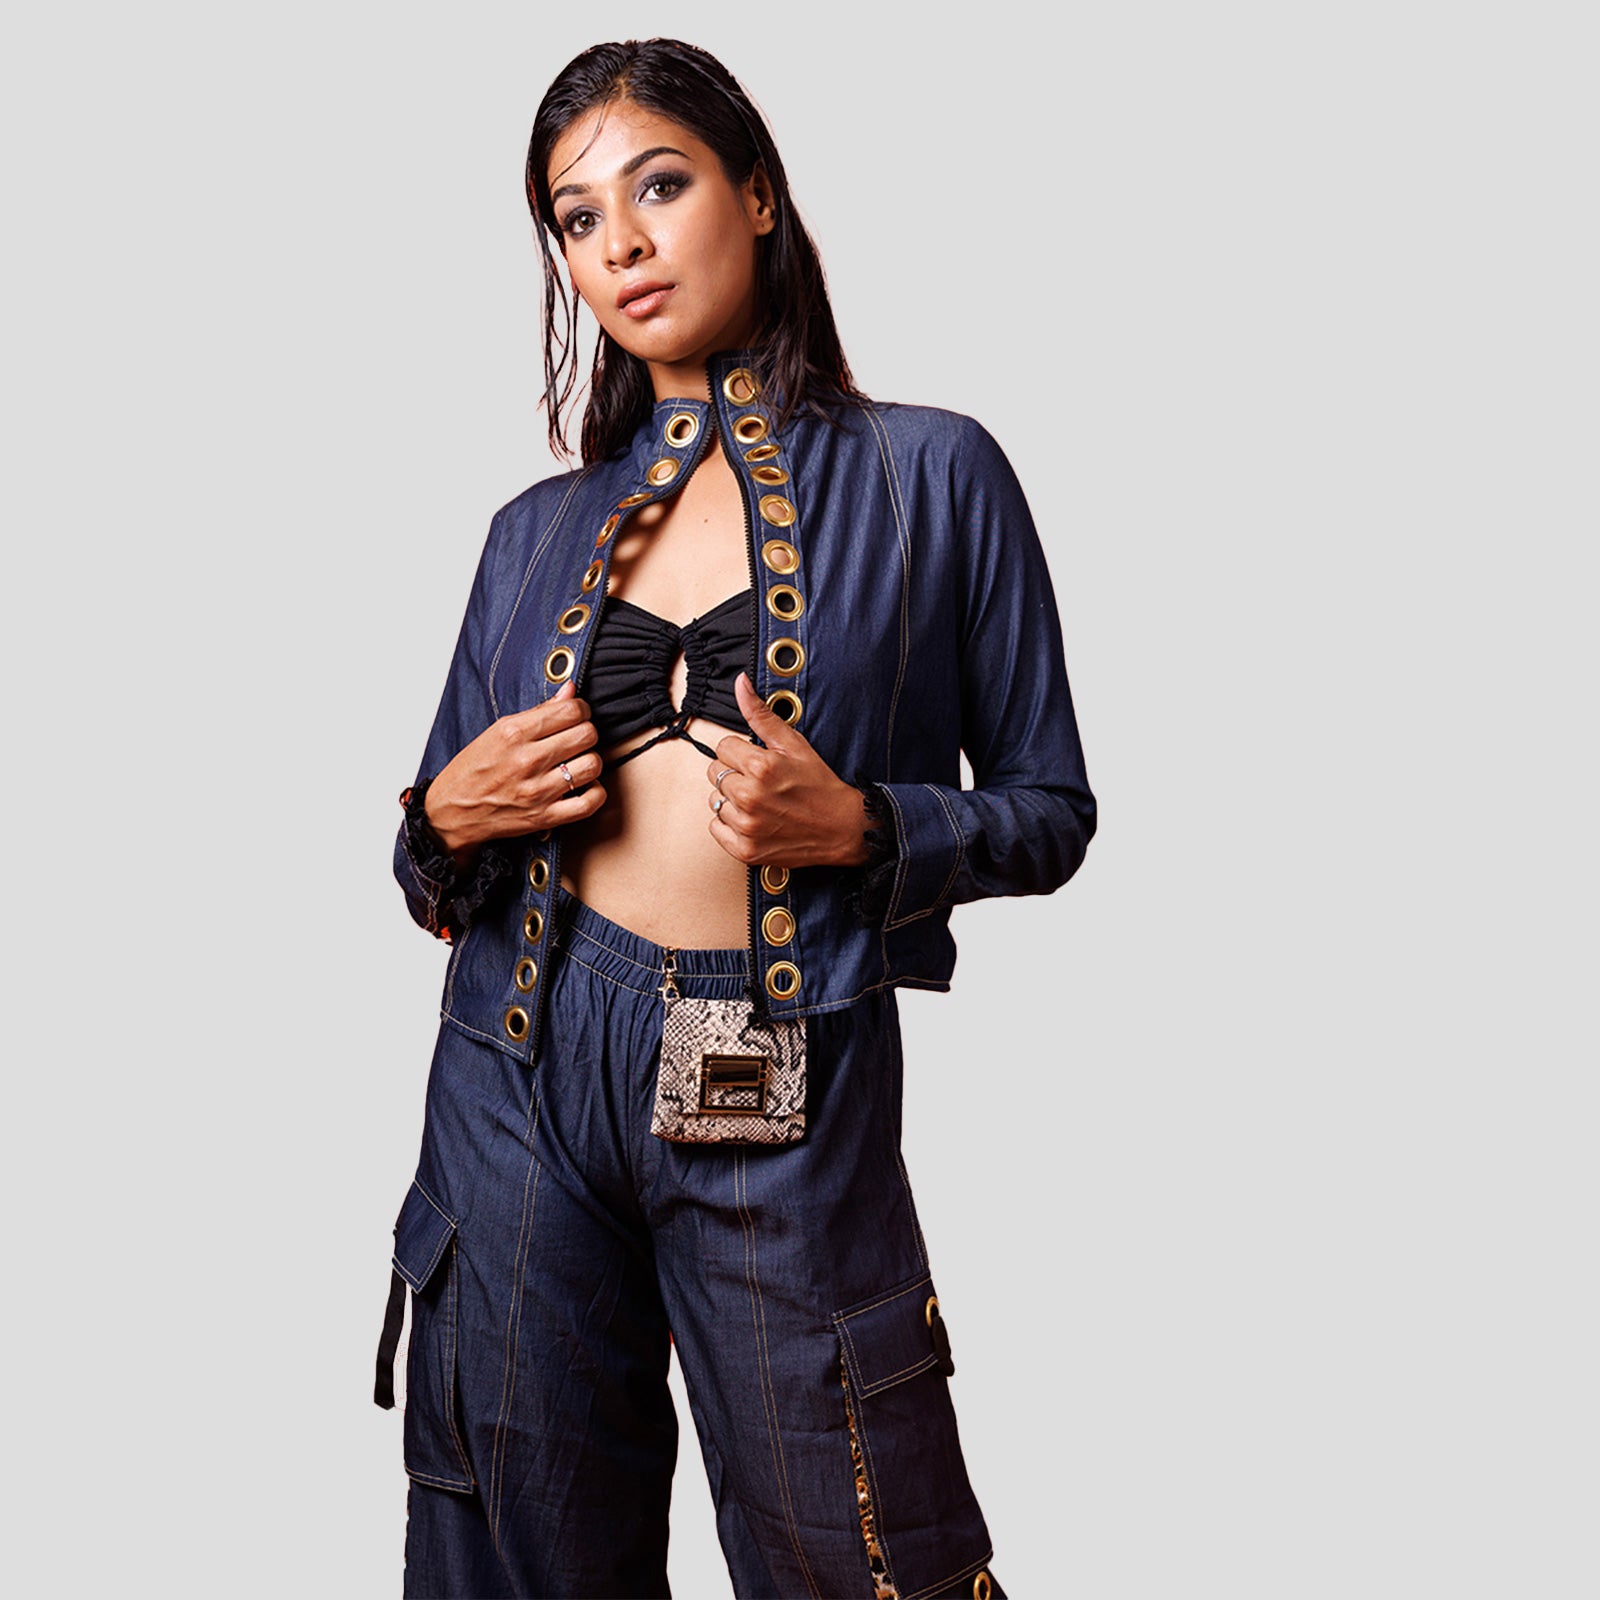 DENIM JACKET WITH EYELET DETAILING AND WIDE LEG CARGO PANTS WITH EYELET DETAILING